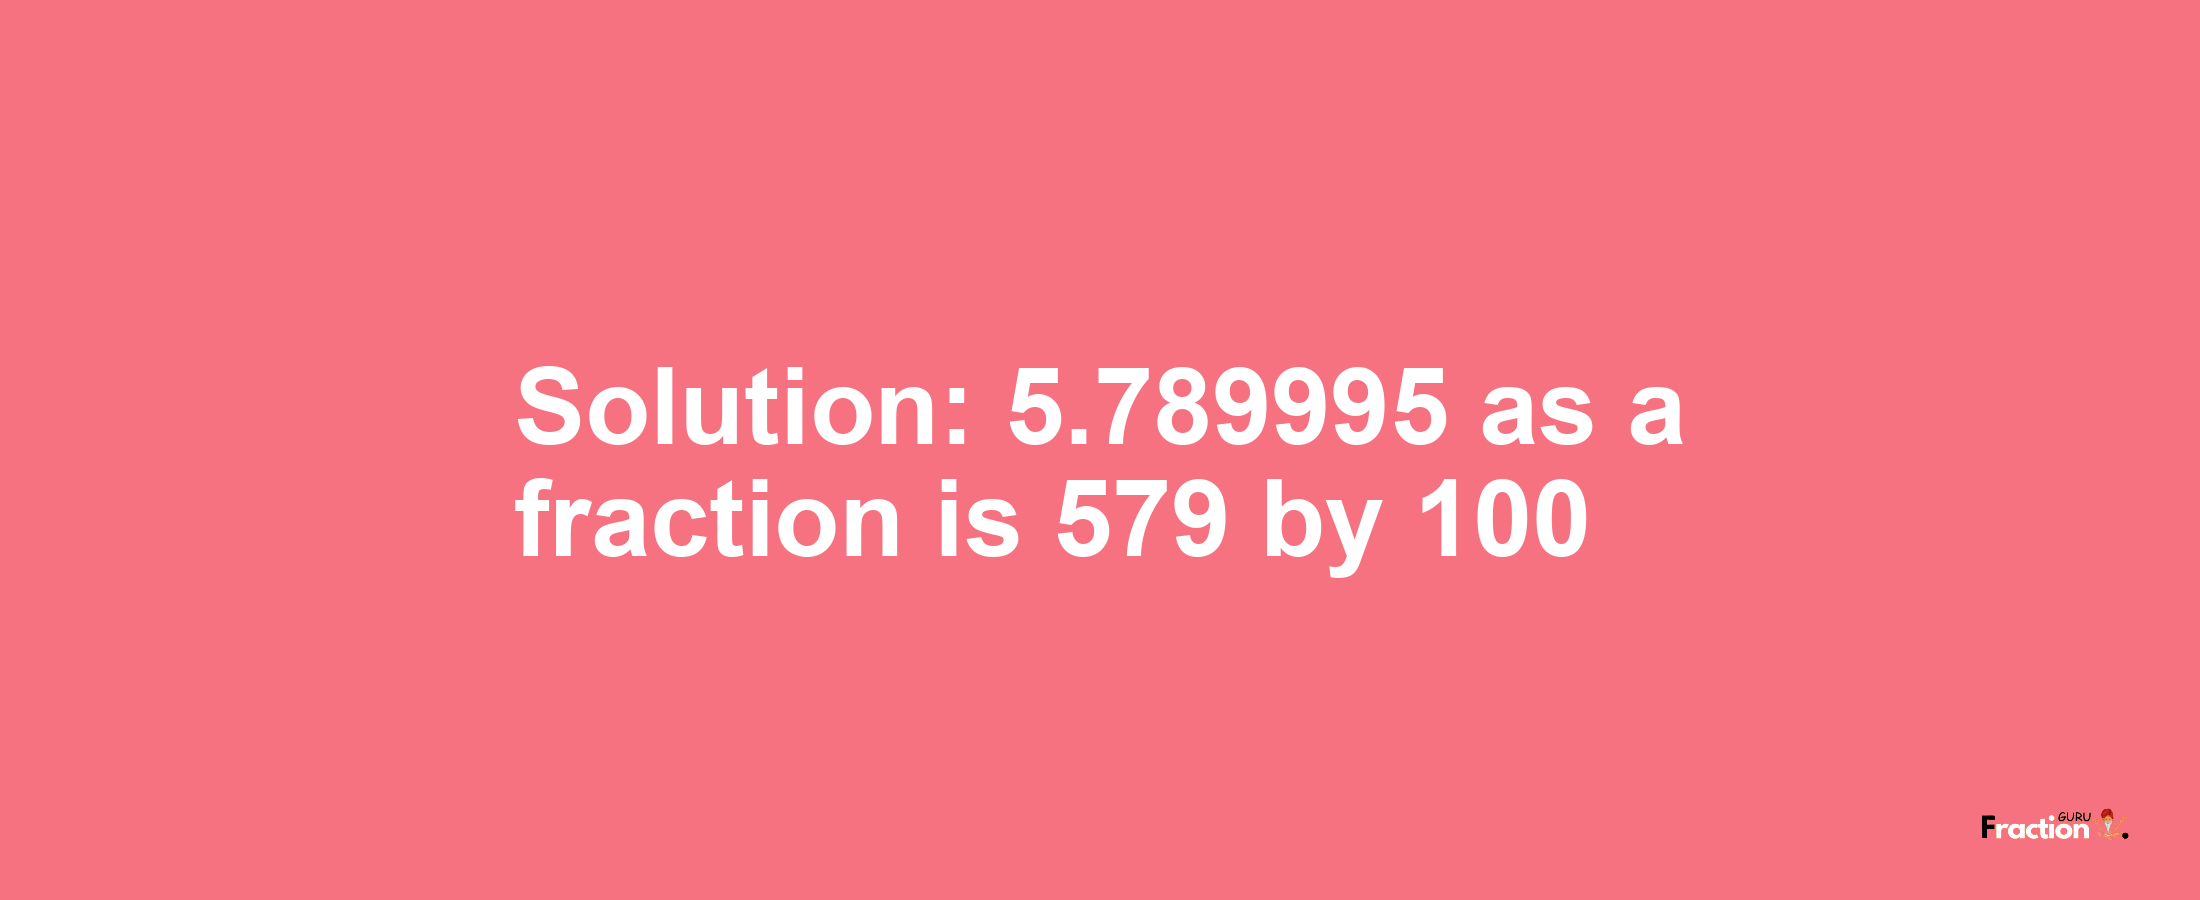 Solution:5.789995 as a fraction is 579/100